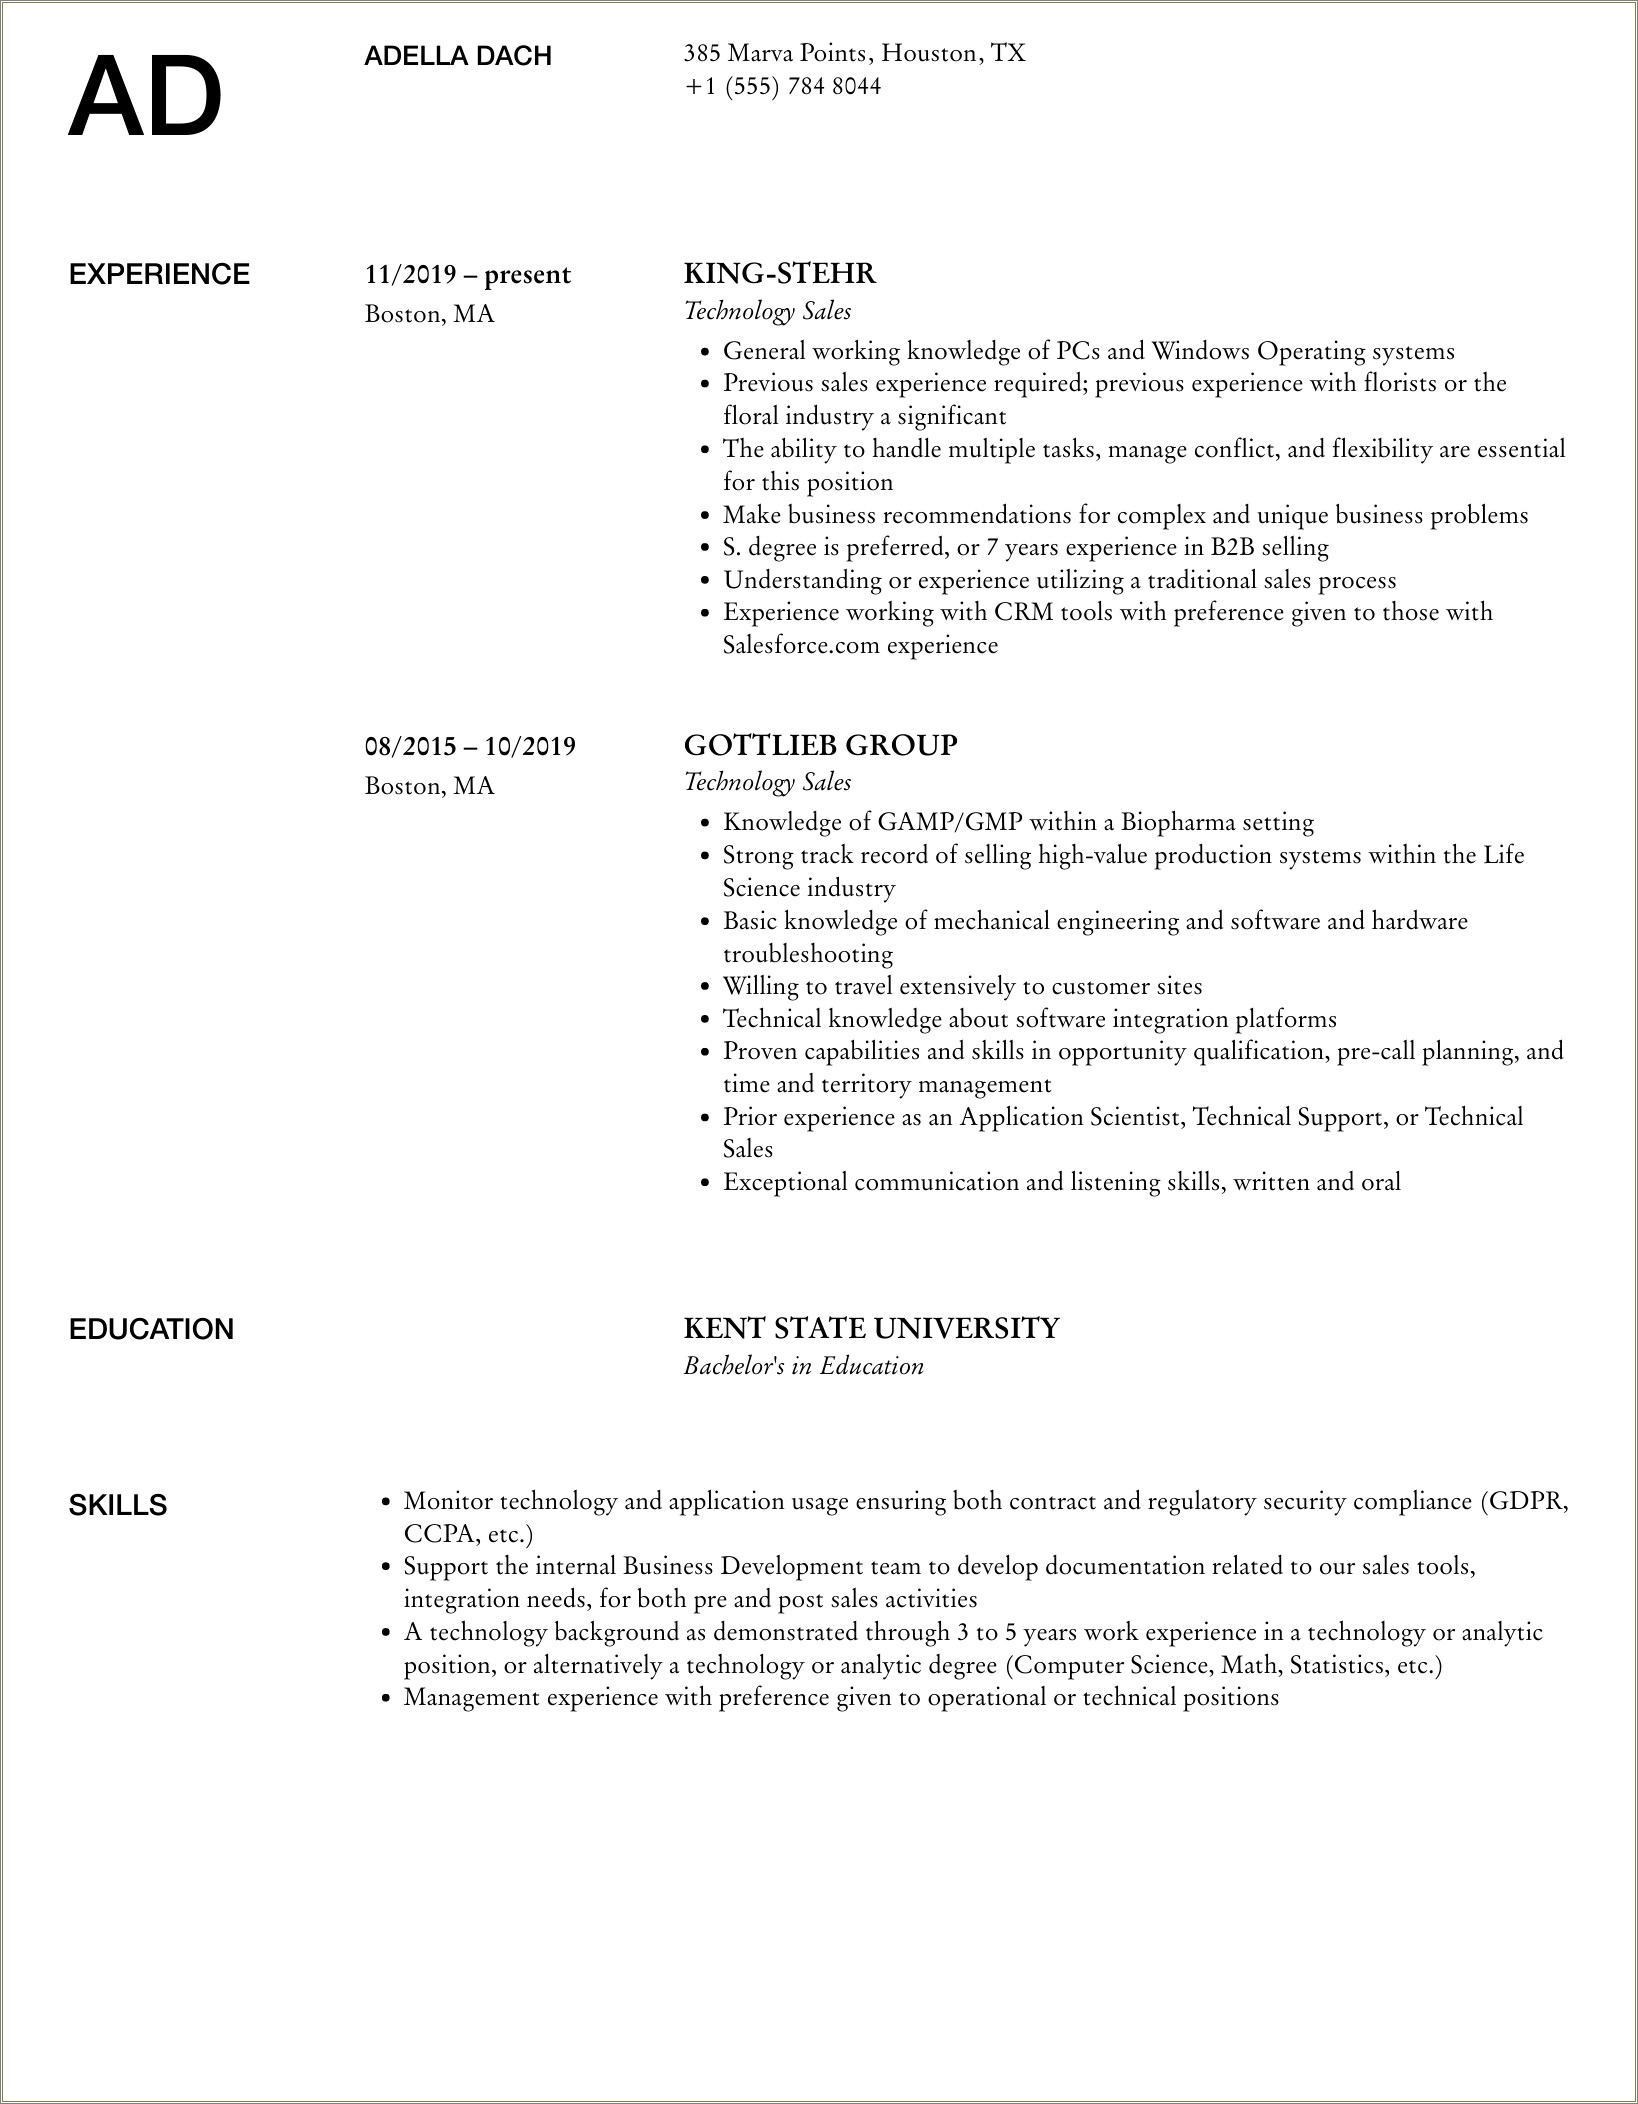 Resume Templates For Technology Sales Jobs